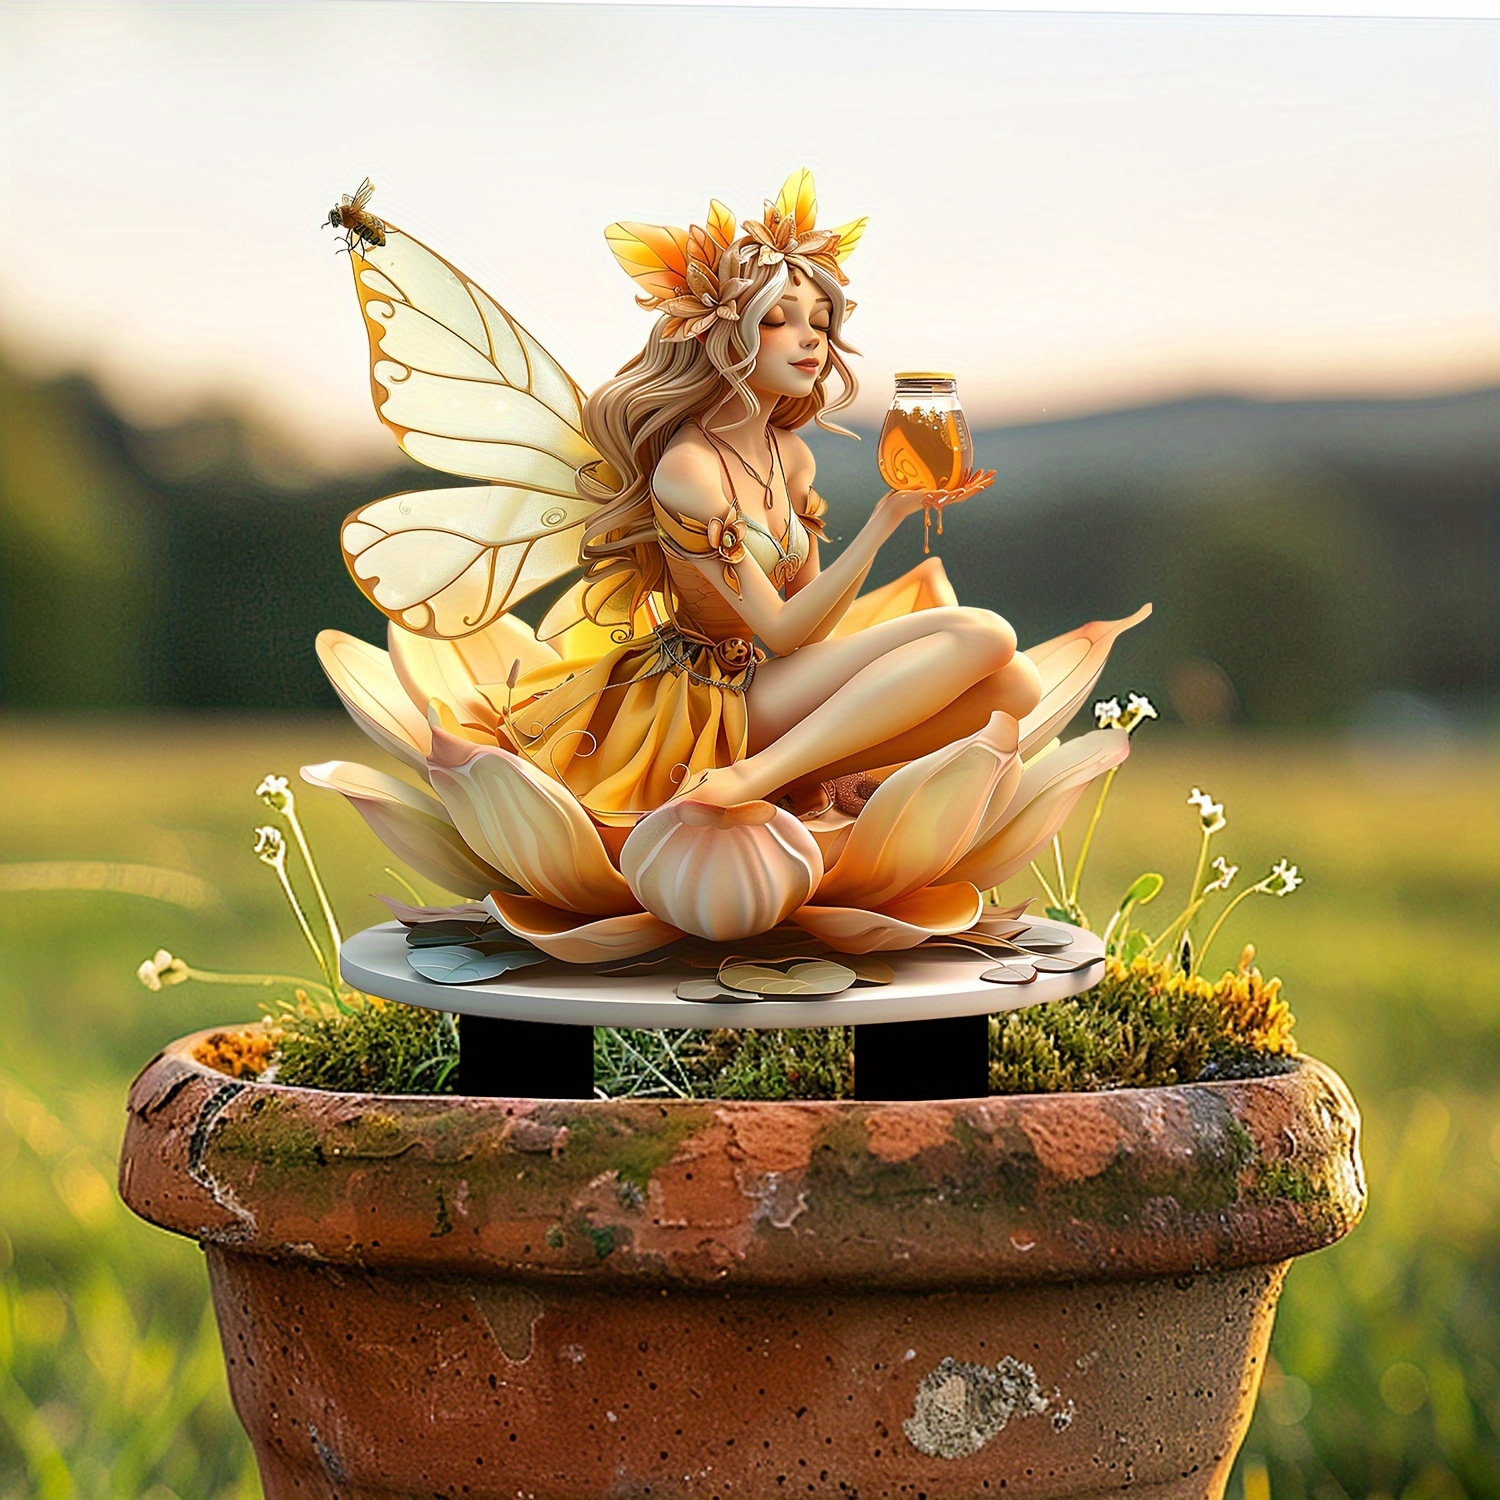 

Boho-chic Flower Fairy With Honey Garden Stake - Acrylic, 11.8"x8.6" - Perfect For Pot Landscaping & Outdoor Decor